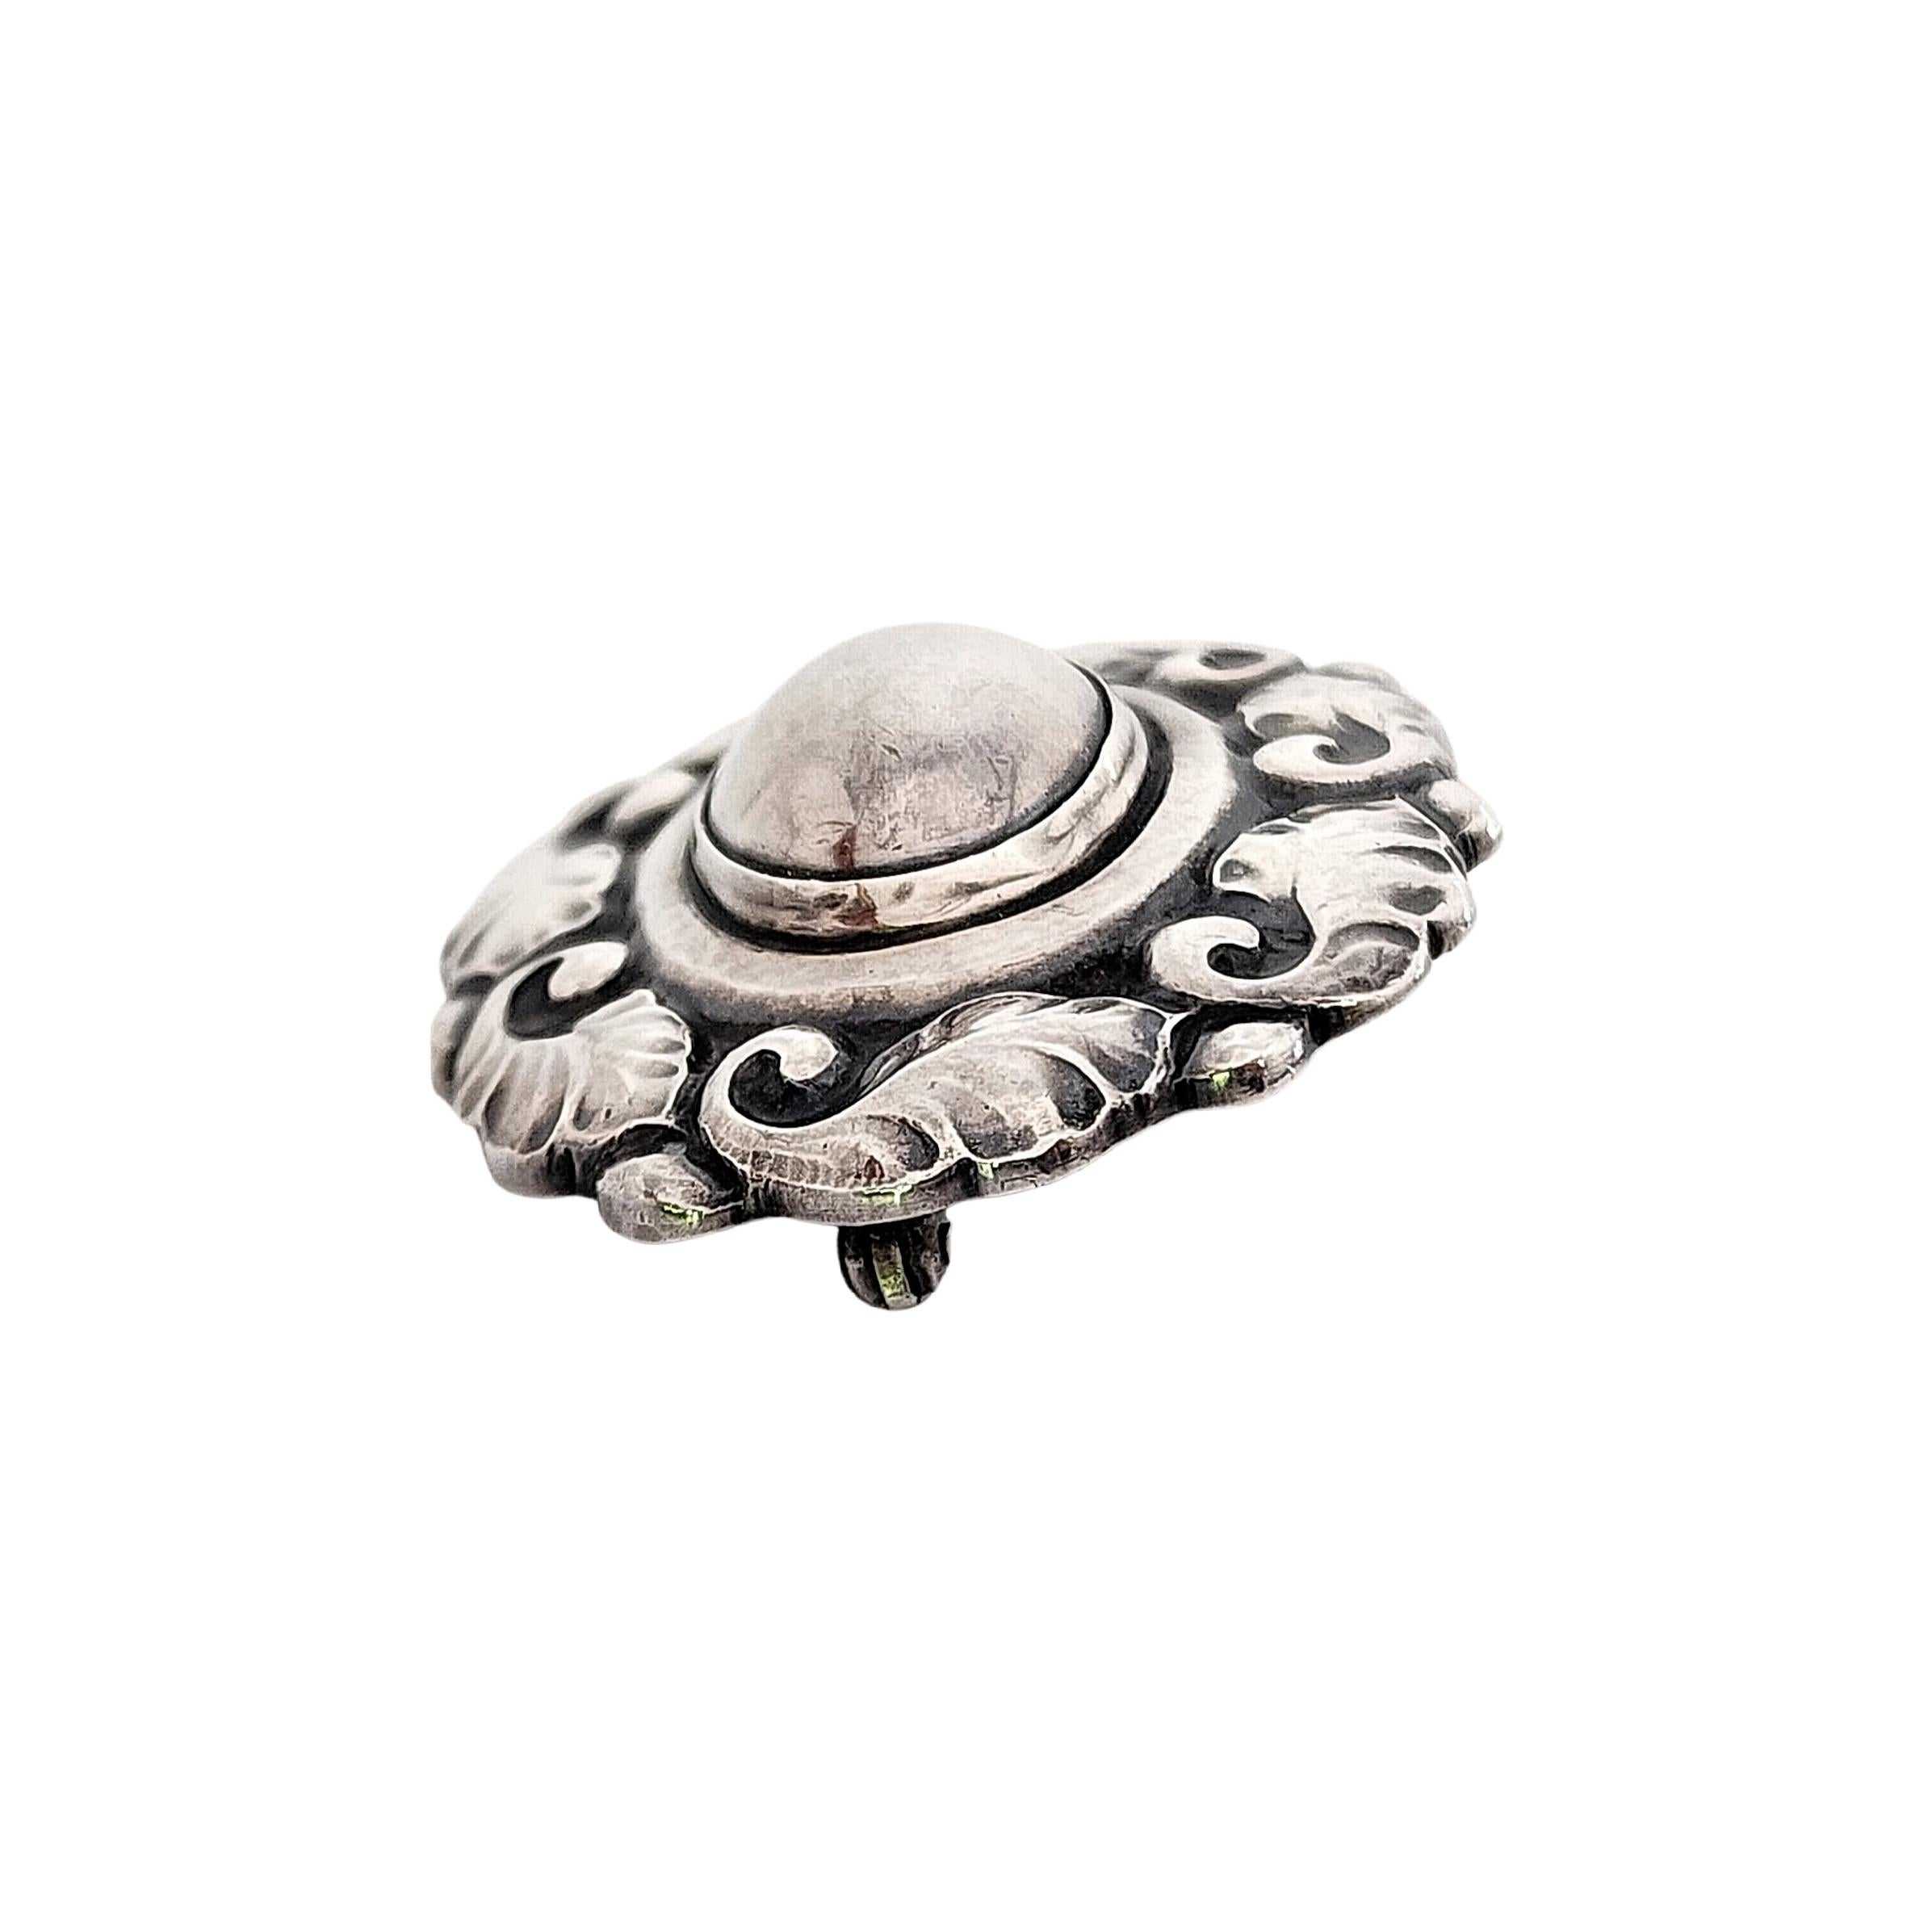 Georg Jensen Denmark Sterling Silver 60 Oval Dome Leaf Pin/Brooch #14682 In Good Condition For Sale In Washington Depot, CT